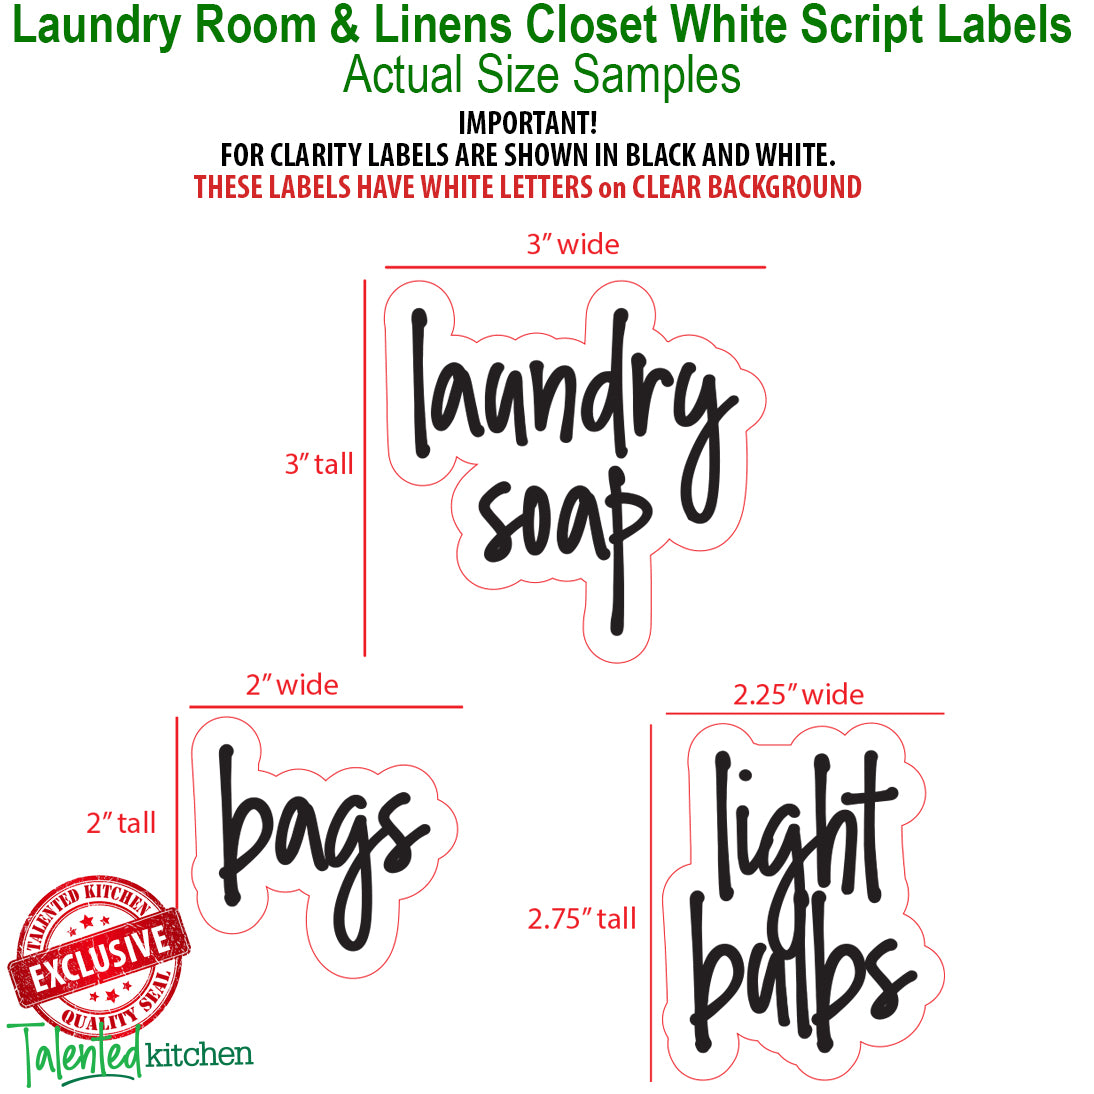 Talented Kitchen 141 Laundry Room Labels for Jars and Containers, Preprinted White Script Stickers for Linen Closet, Bathroom Organization, Cleaning